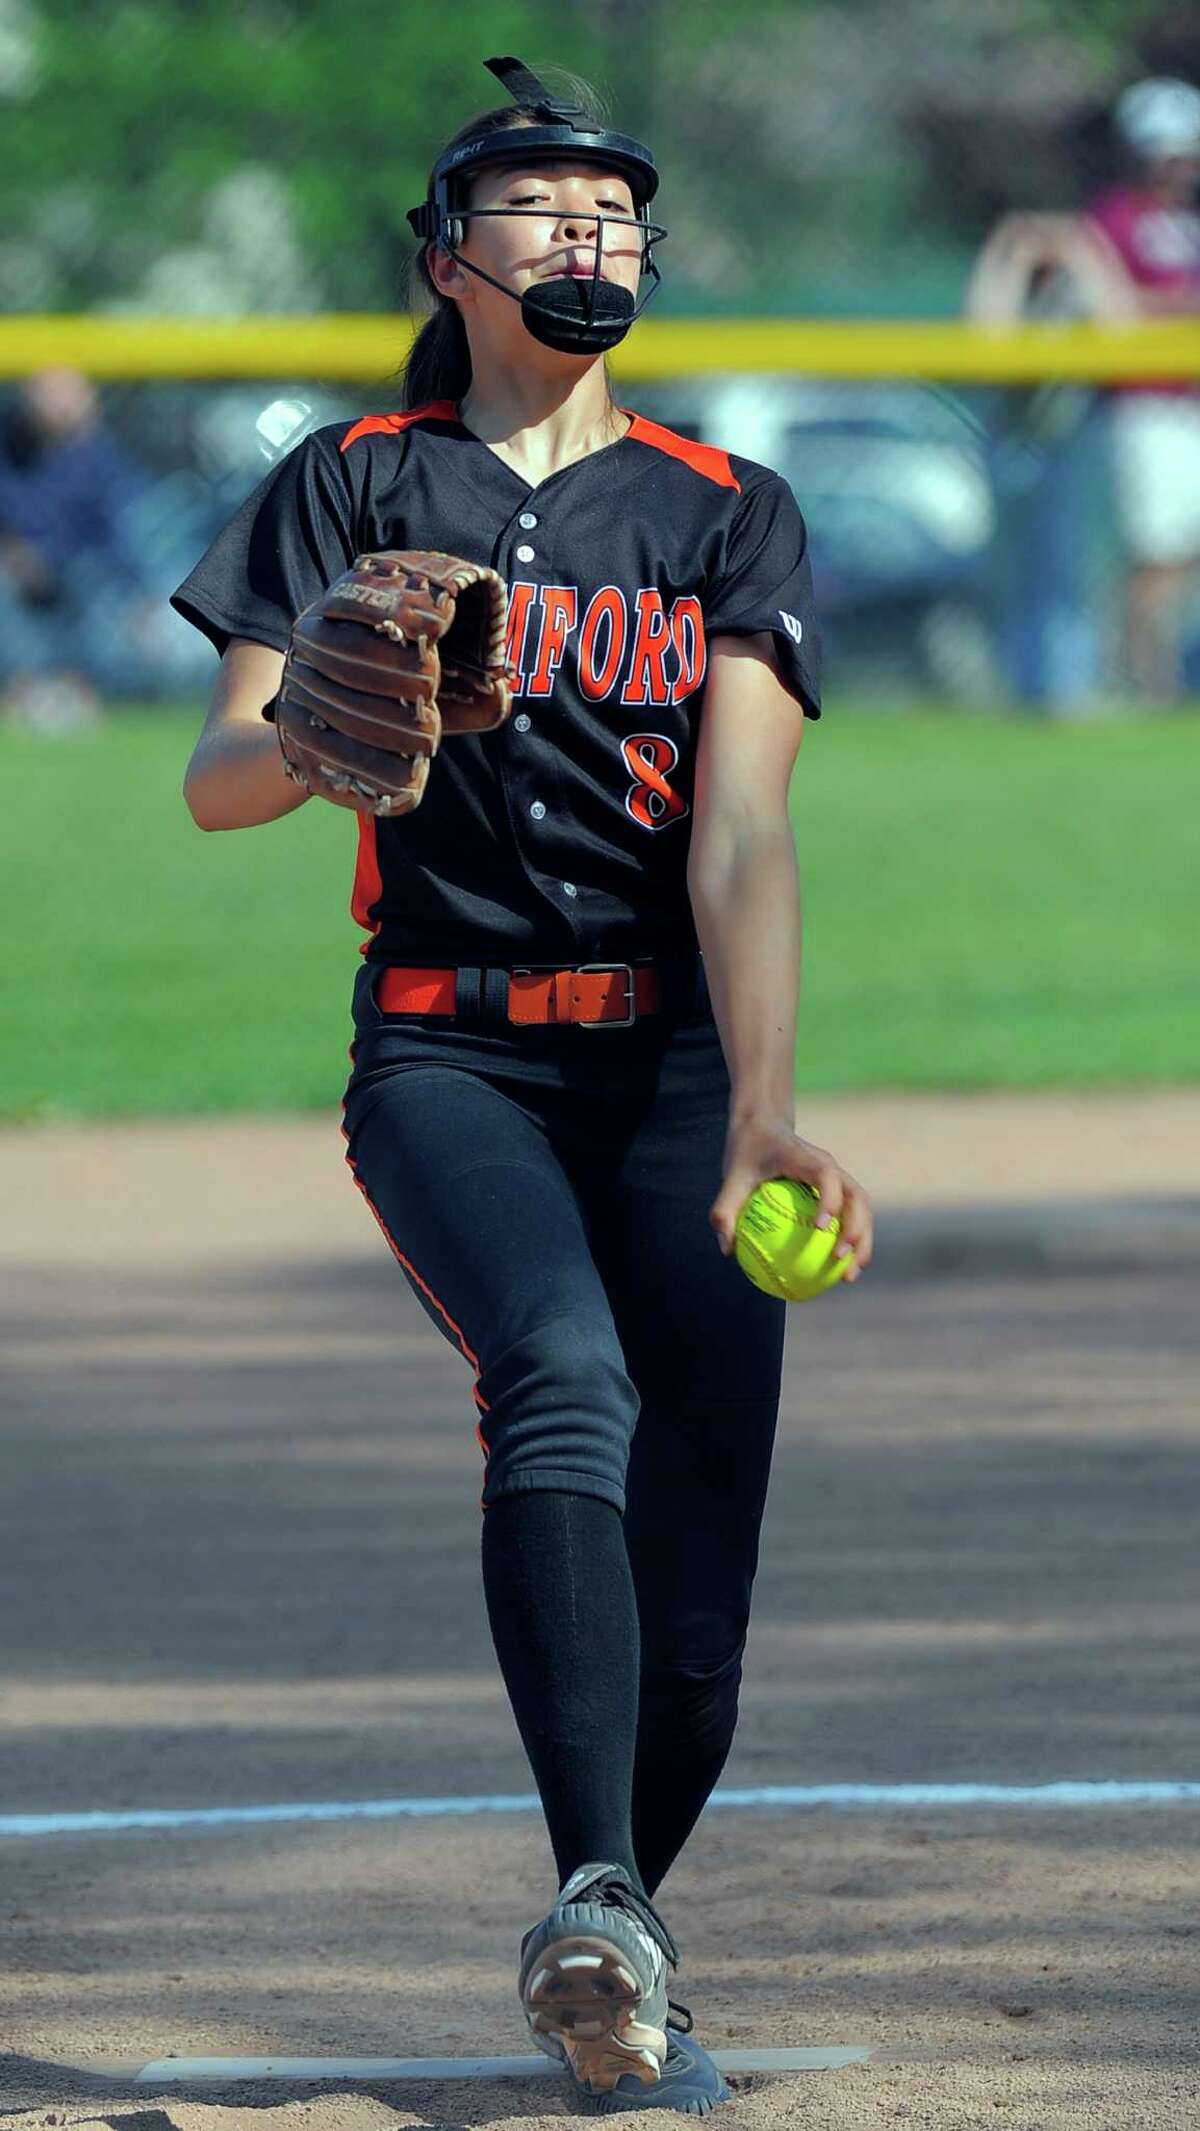 Stamford pitcher Sara Staley delivers during the first inning of a FCIAC girls softball game against Trumbull at Stamford High School on Thursday, May 12, 2016. Stamford top Trumbull 3-2 following Staley scoring the game winning run in the 11th inning.